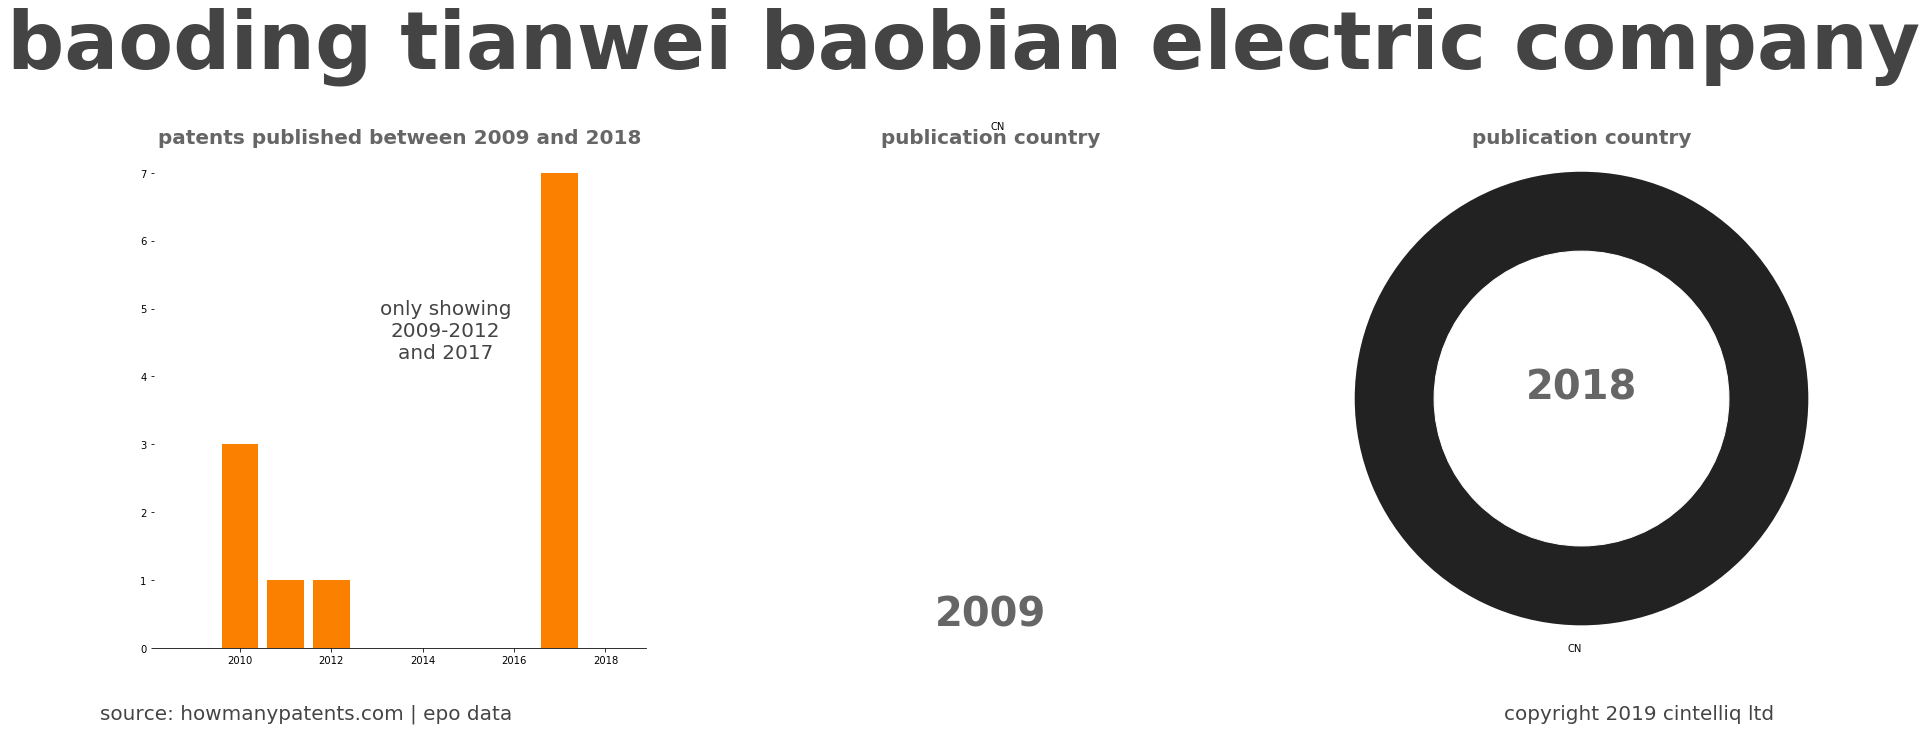 summary of patents for Baoding Tianwei Baobian Electric Company